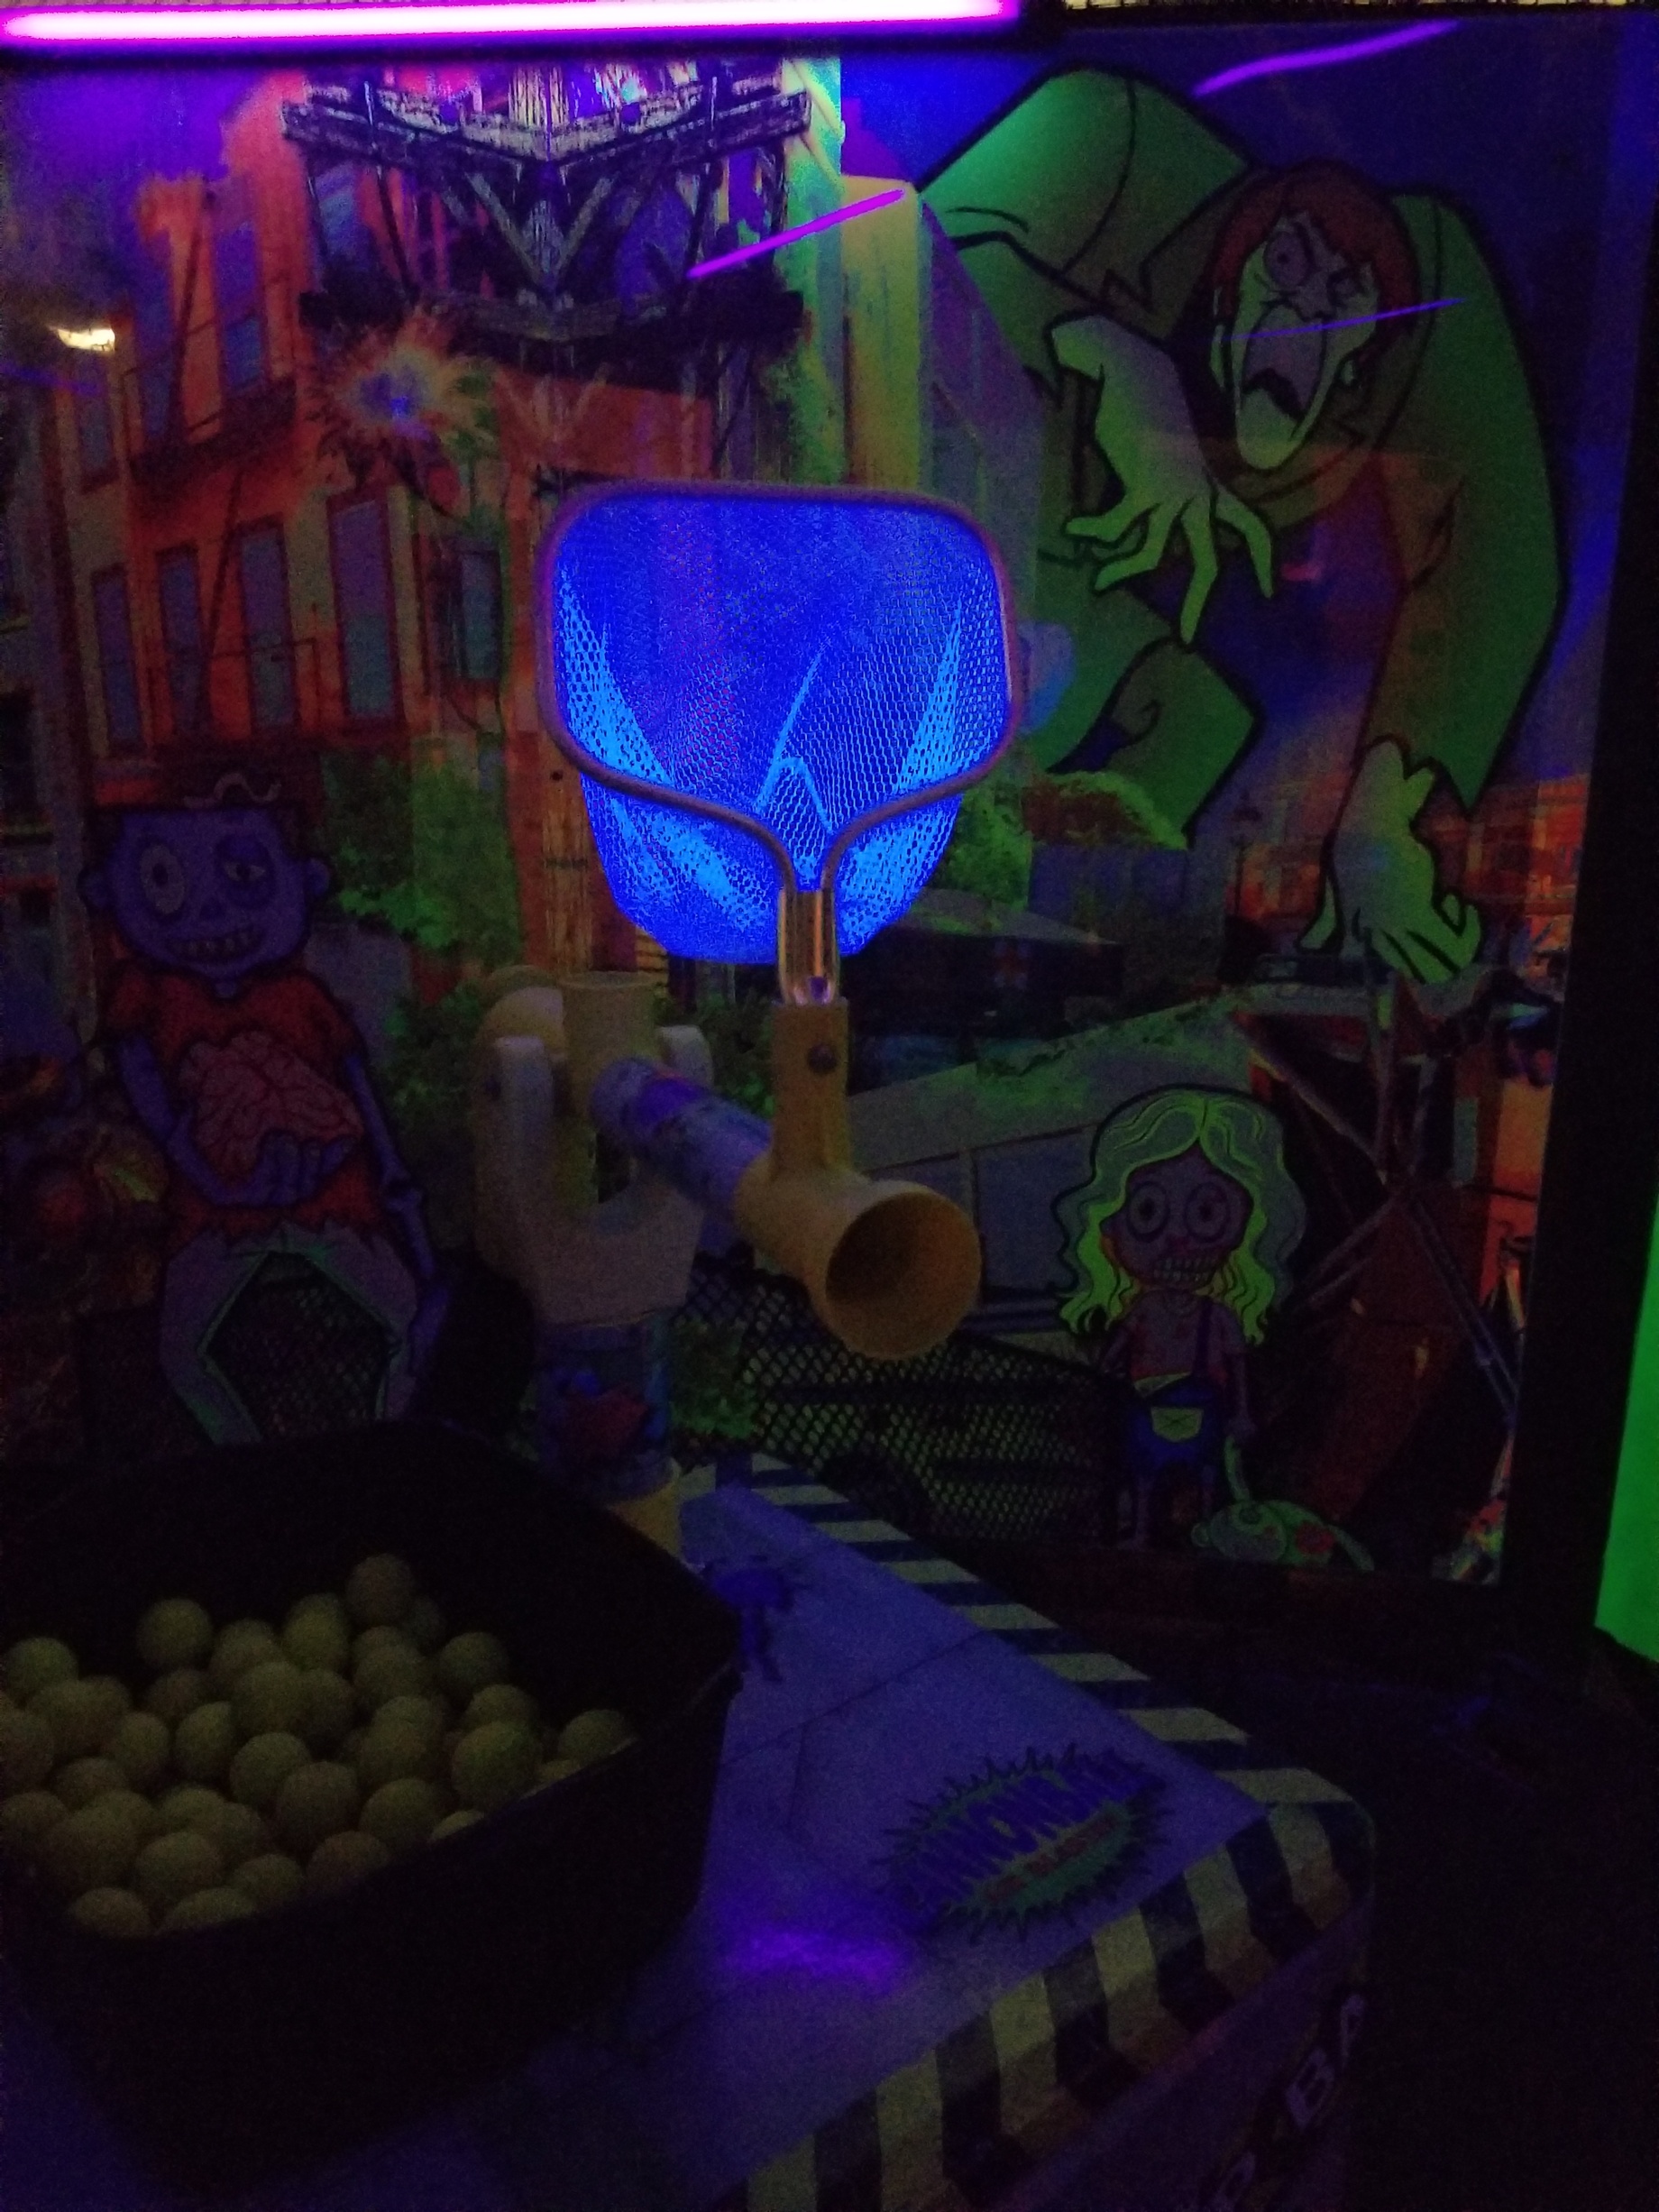 Party center with glow in the dark play area